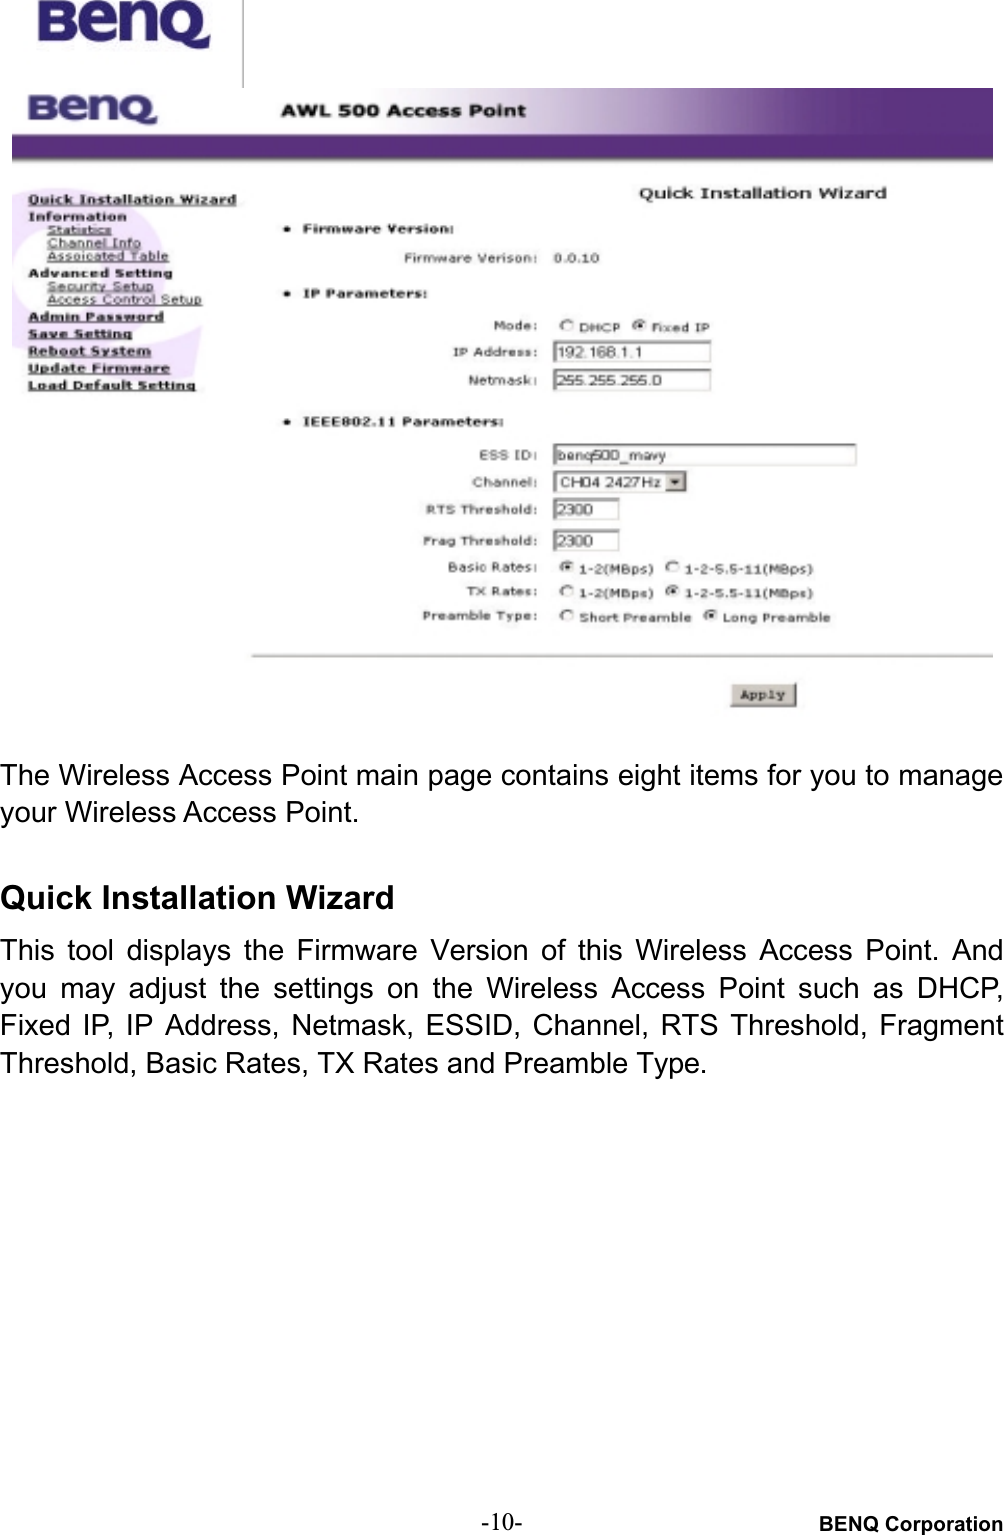 BENQ Corporation-10-The Wireless Access Point main page contains eight items for you to manage your Wireless Access Point.Quick Installation Wizard This  tool  displays  the  Firmware  Version  of  this  Wireless  Access  Point.  Andyou  may  adjust  the  settings  on  the  Wireless  Access  Point  such  as  DHCP,Fixed  IP,  IP  Address,  Netmask,  ESSID,  Channel,  RTS  Threshold,  FragmentThreshold, Basic Rates, TX Rates and Preamble Type.